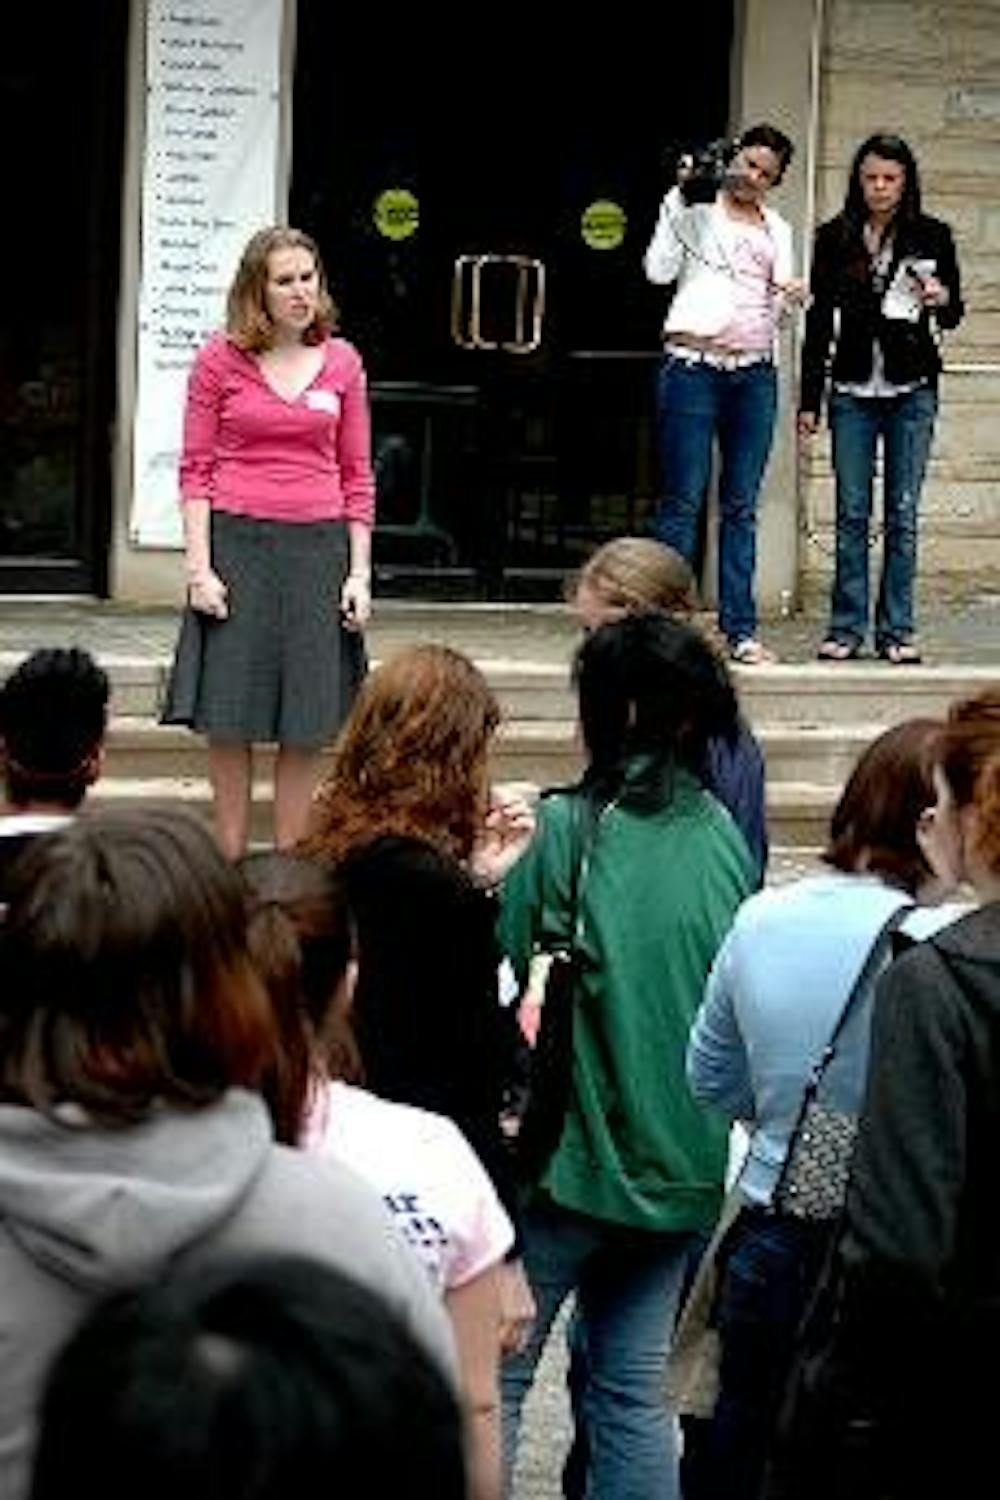 JoAnna Smith speaks to a crowd of supporters after rumors circulated about a by-law amendment to remove Women's Initiative from the Student Government.